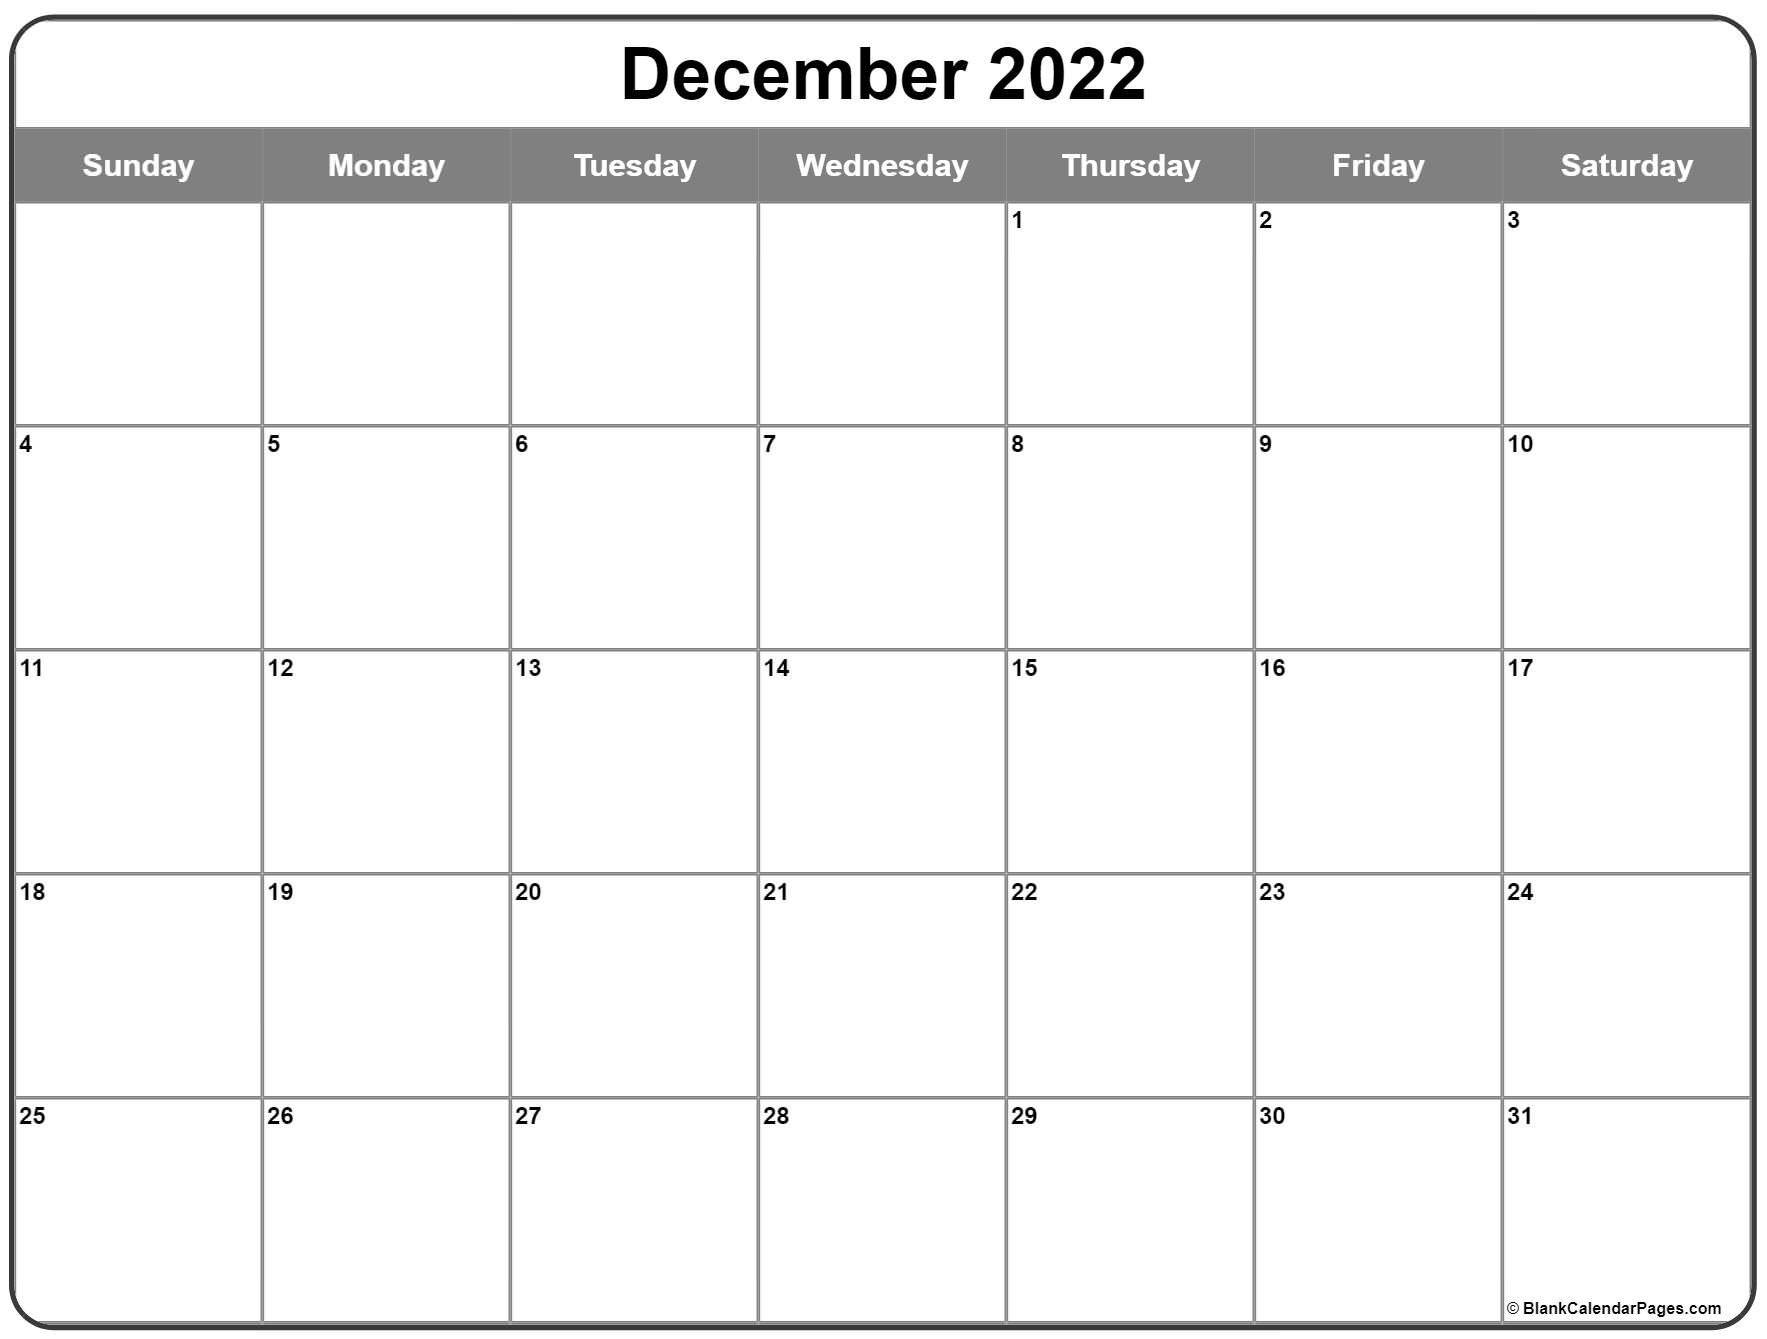 Catch Calendar For The Month Of December 2022